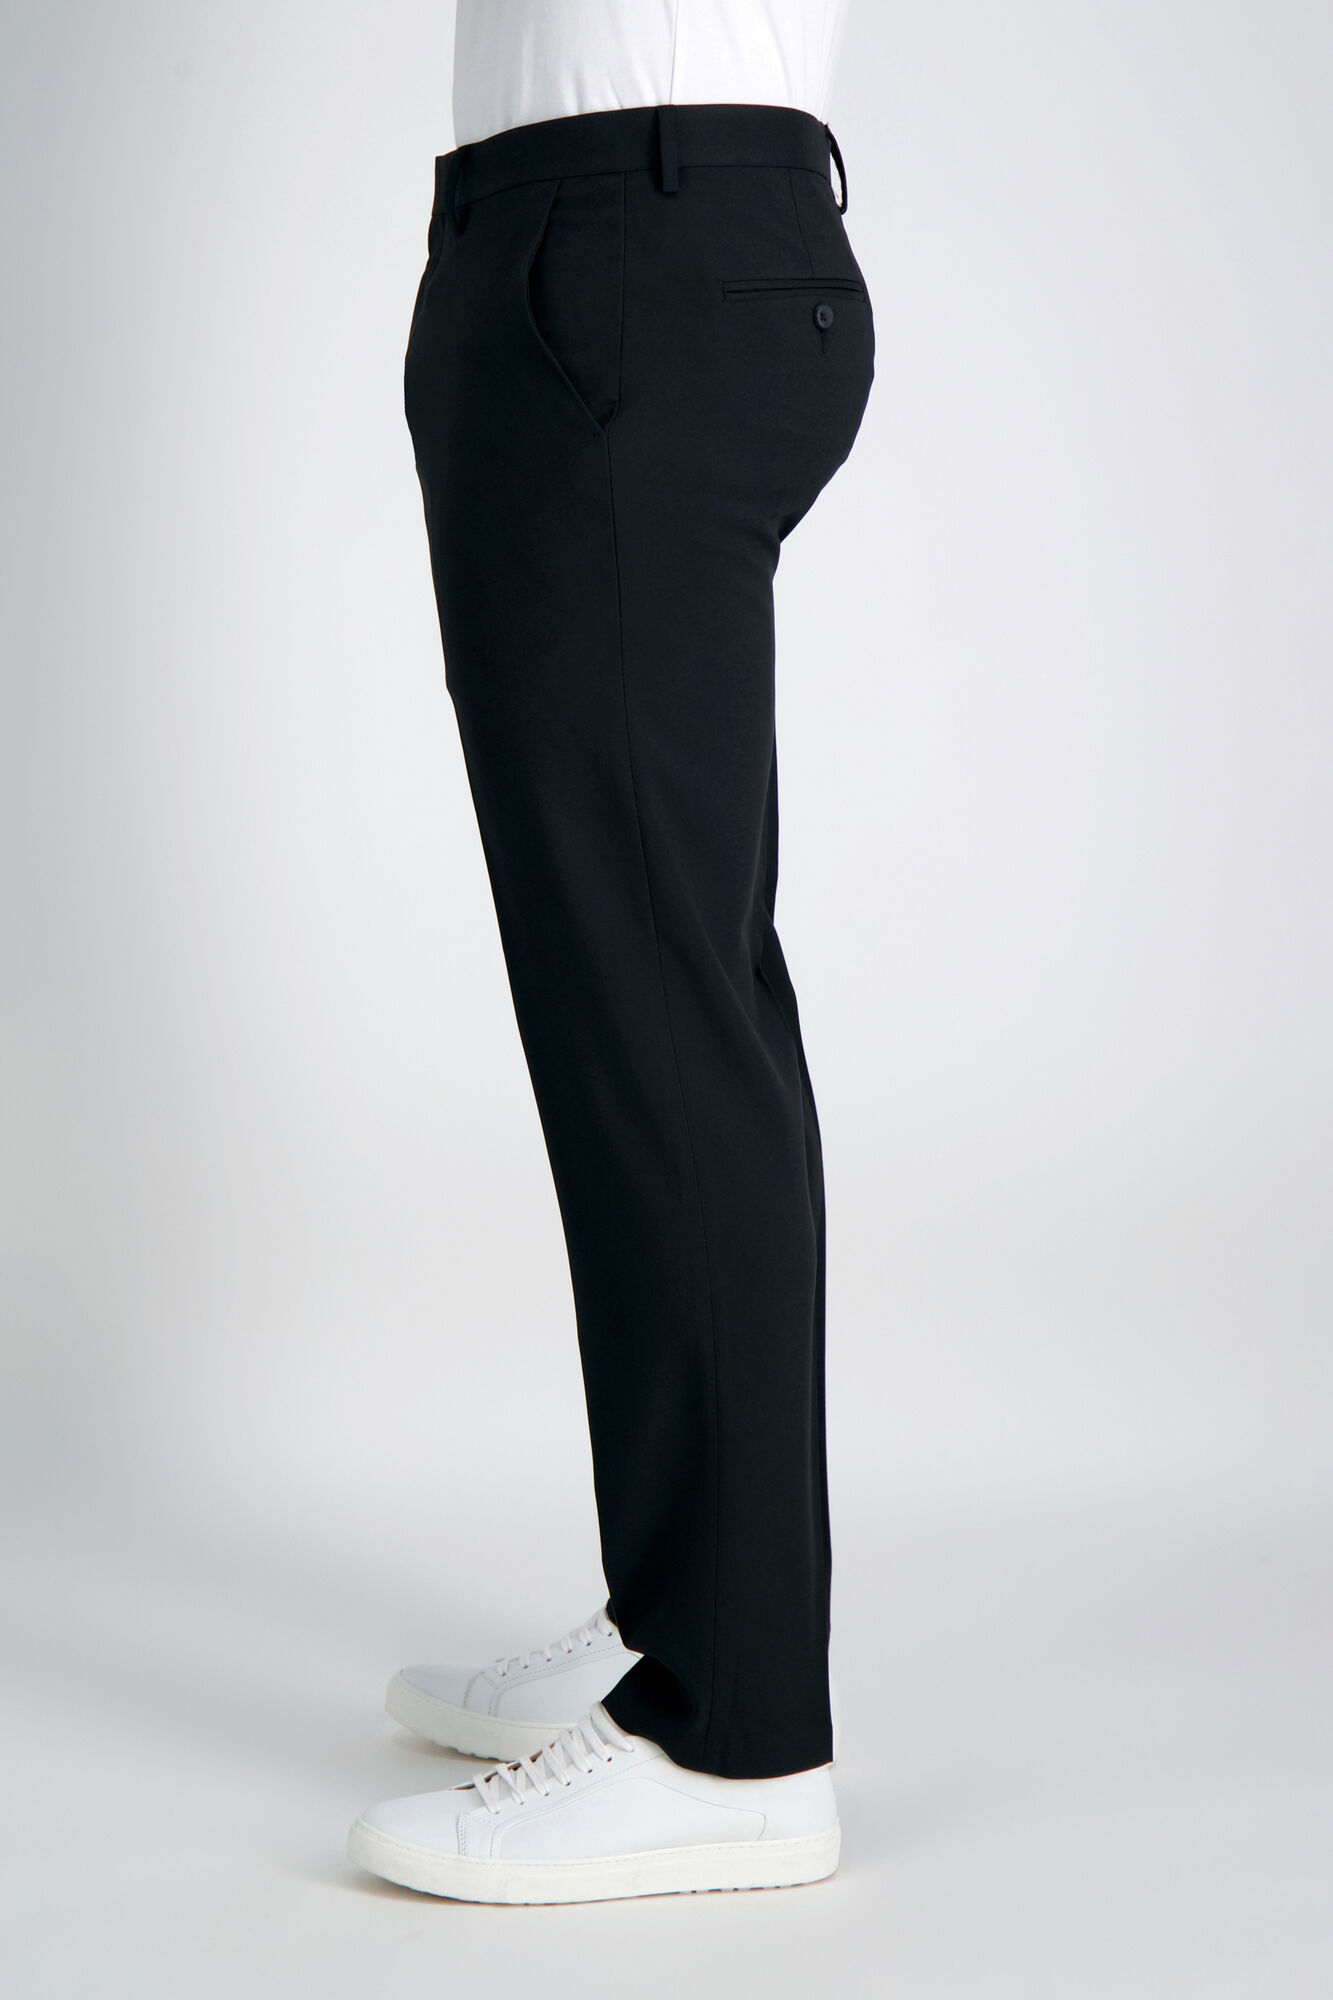 The Active Series™ Performance Pant